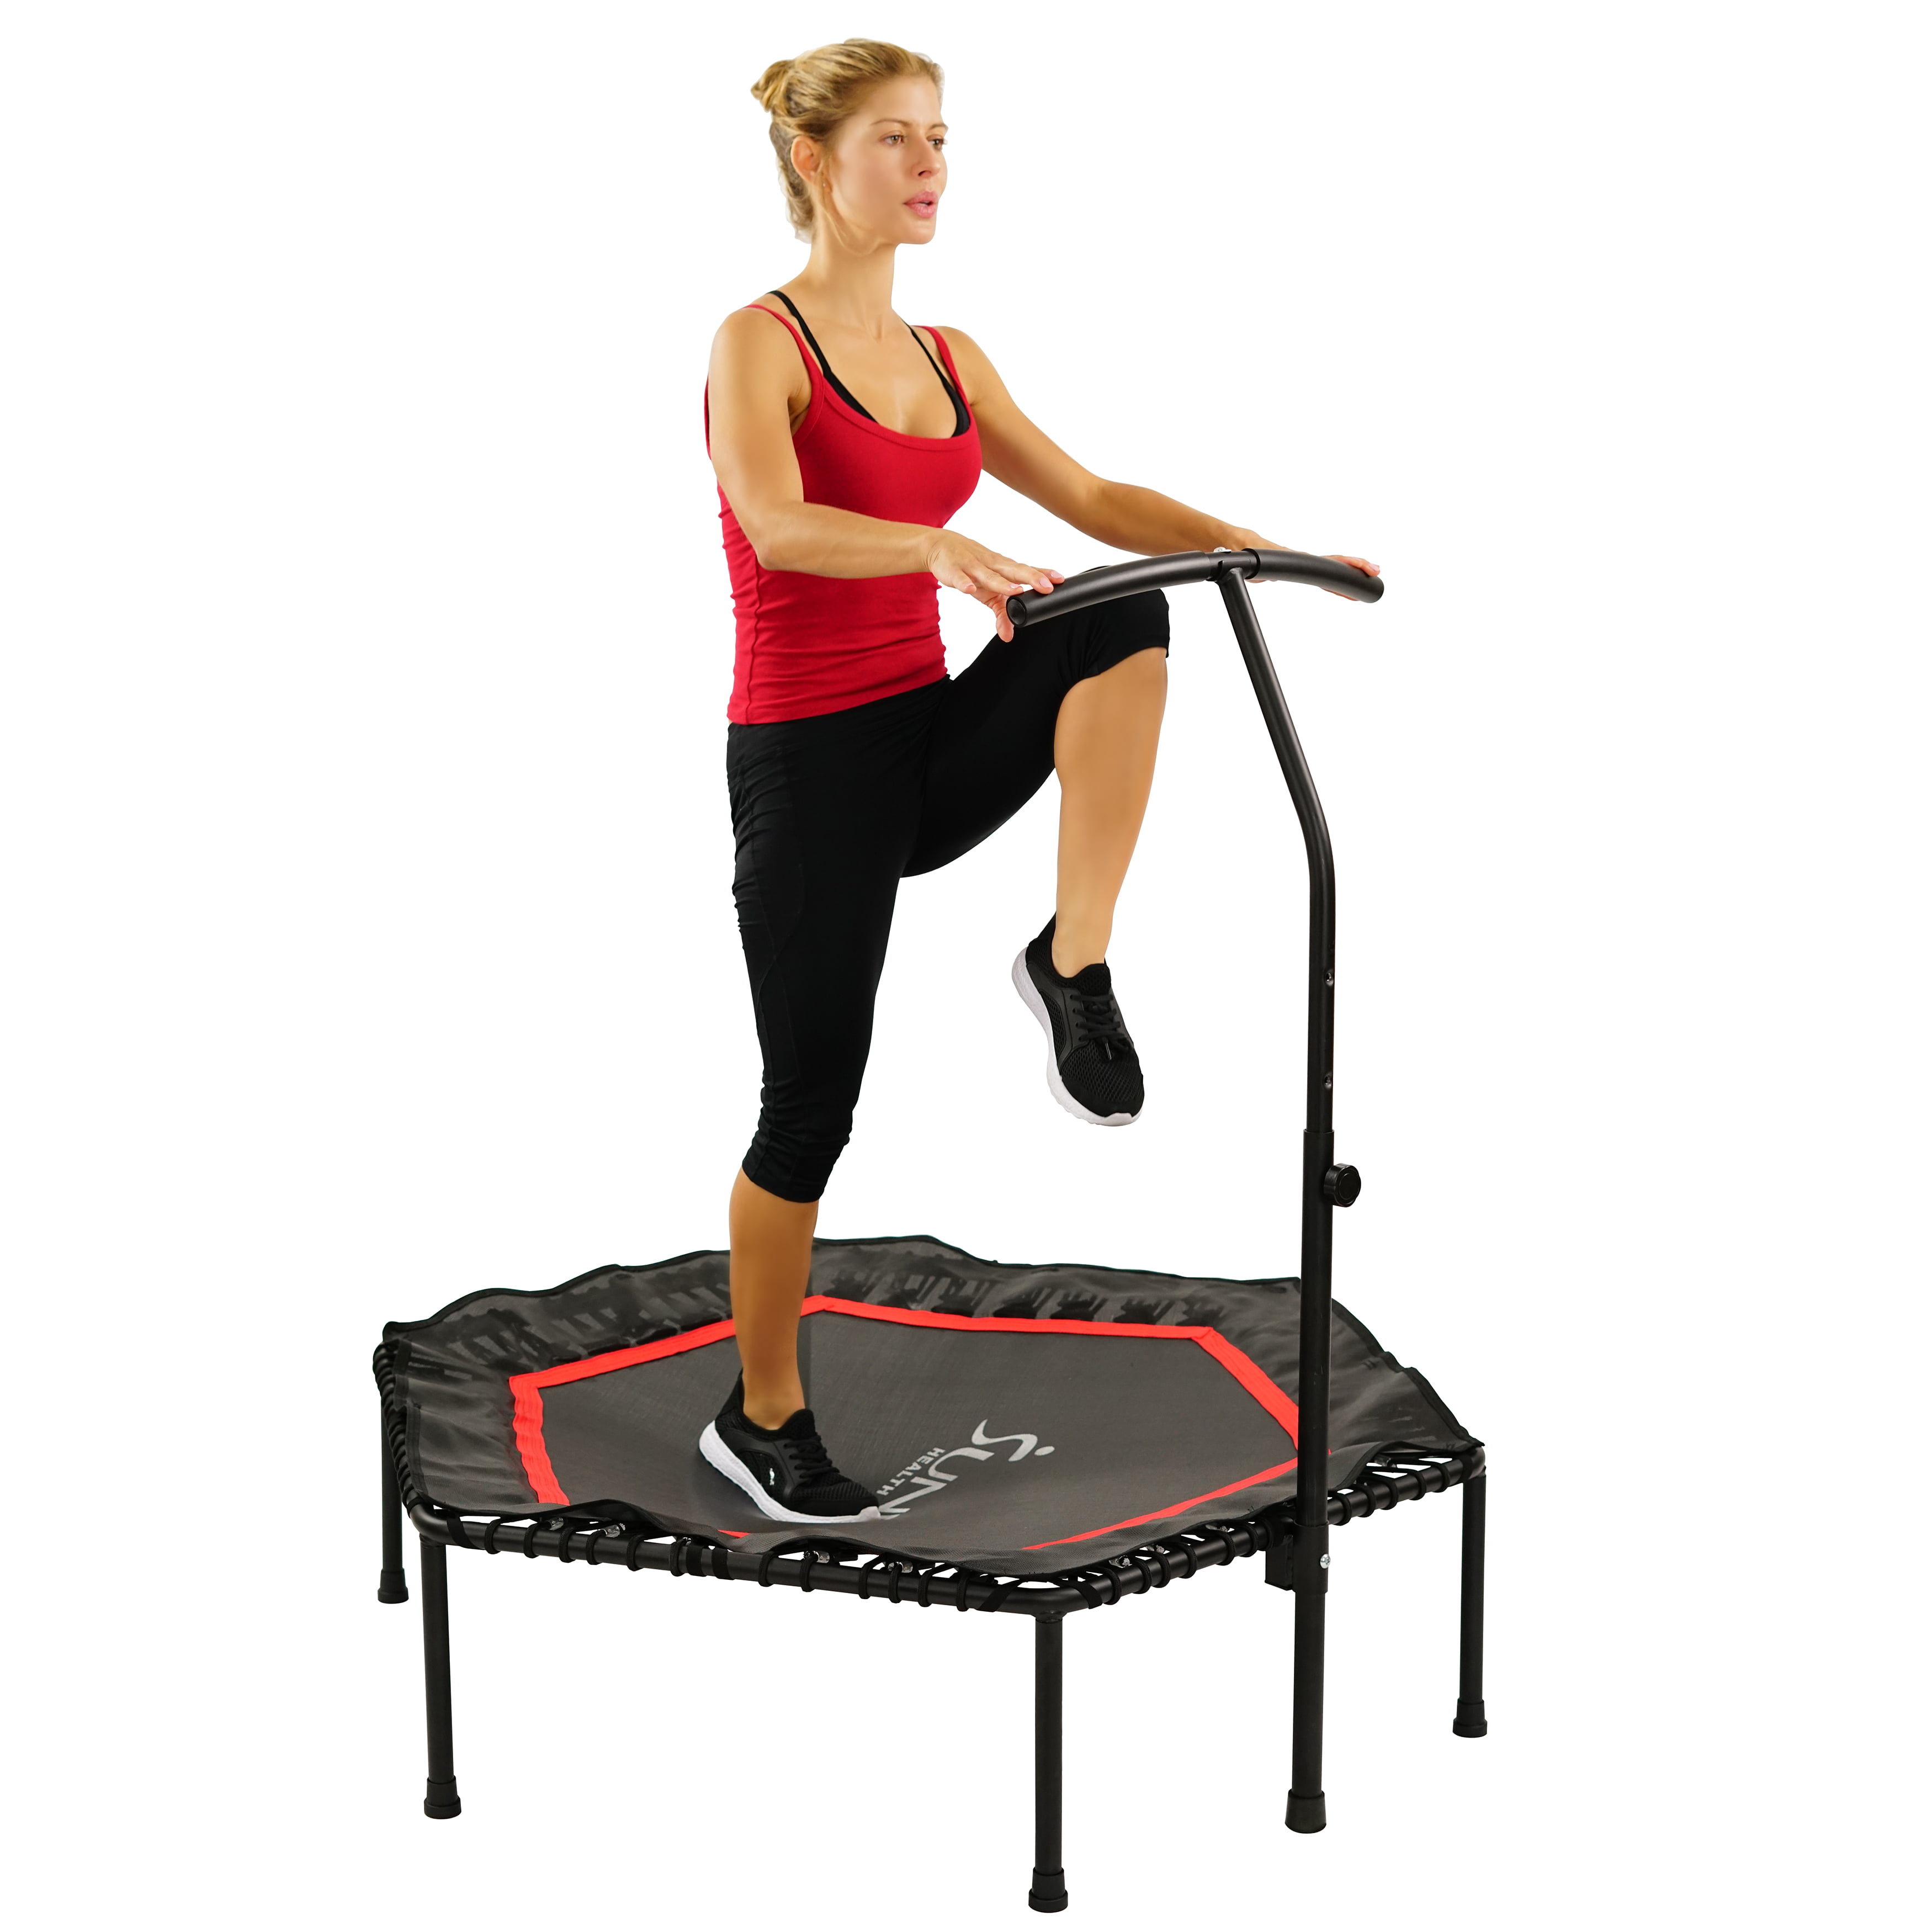 079 Fitness Adjustable & NO. Handlebar, with Exercise Rebounder Indoor Fitness Mini Trampoline Health Sunny